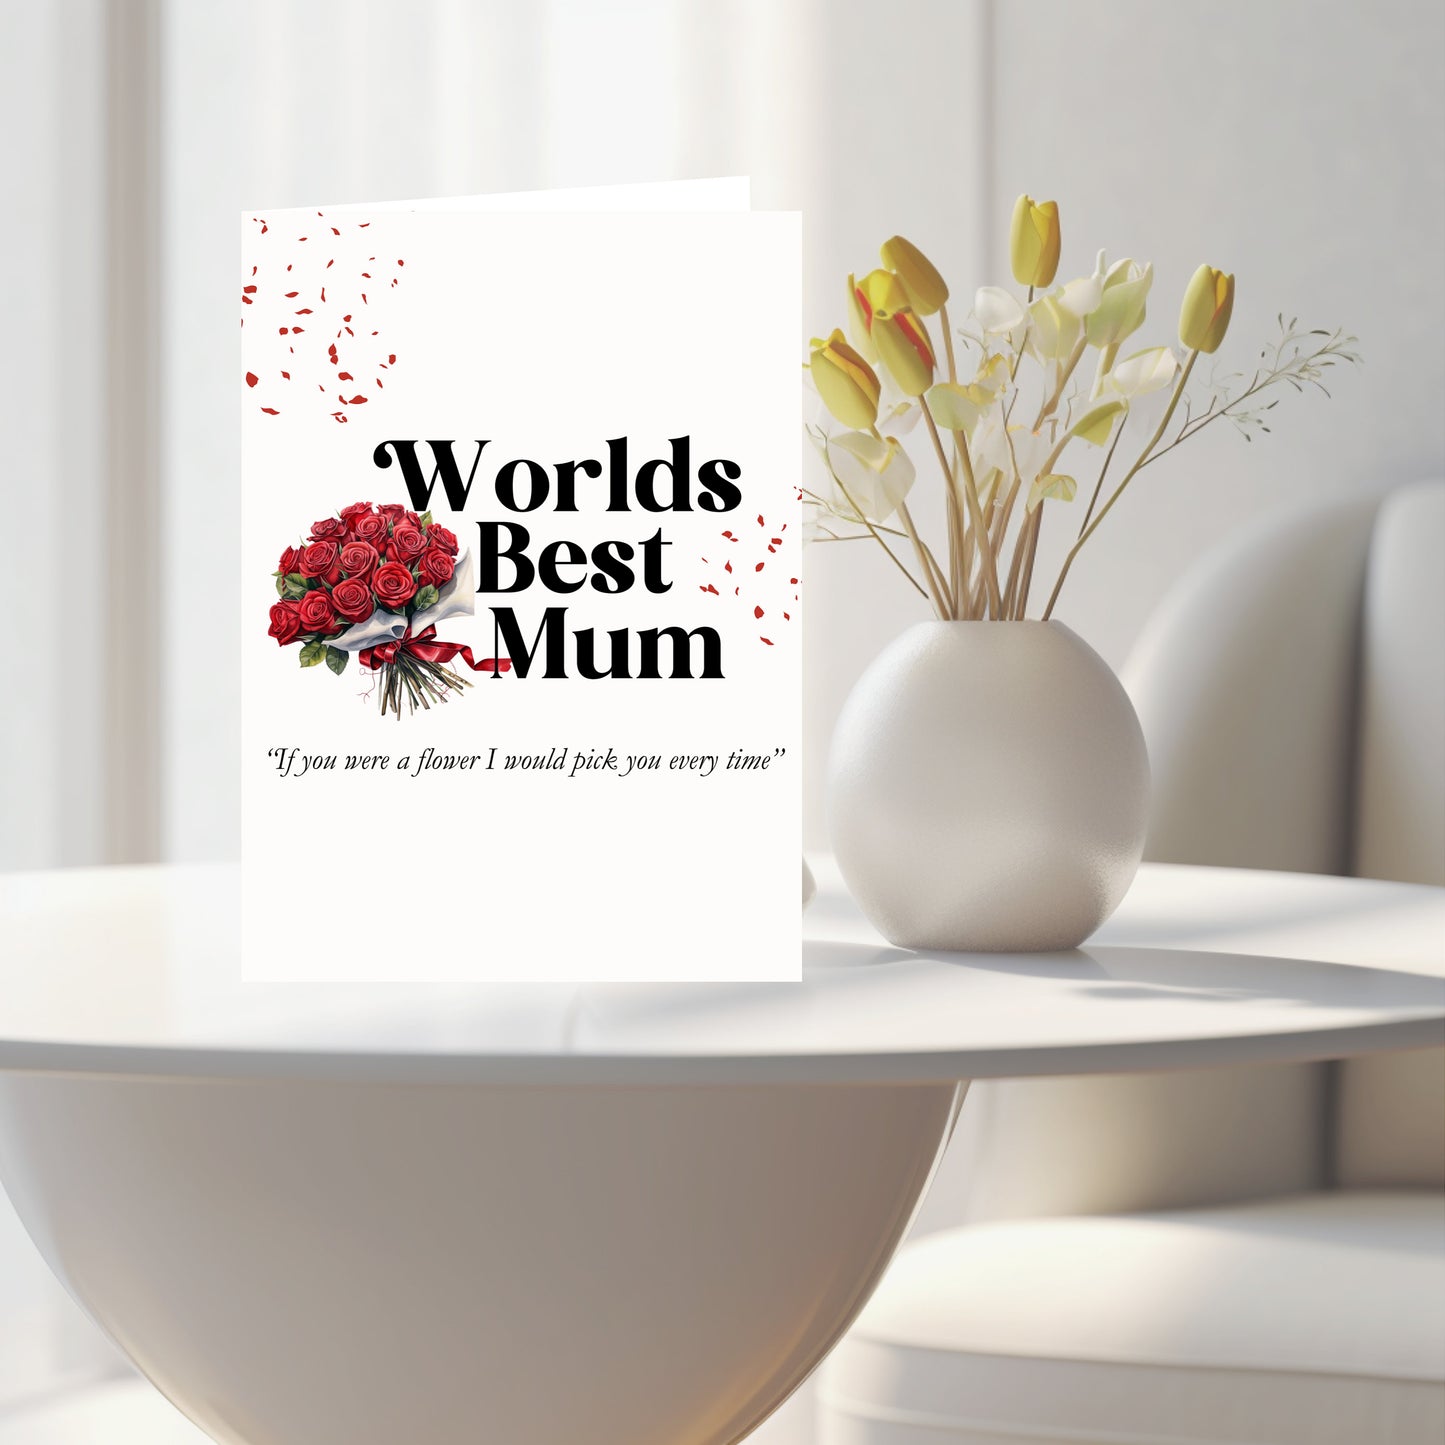 Worlds best mum card, nan card, Personalized mothers day card, beautiful card, Custom Mother’s Day card for Mother’s Day gift for mum